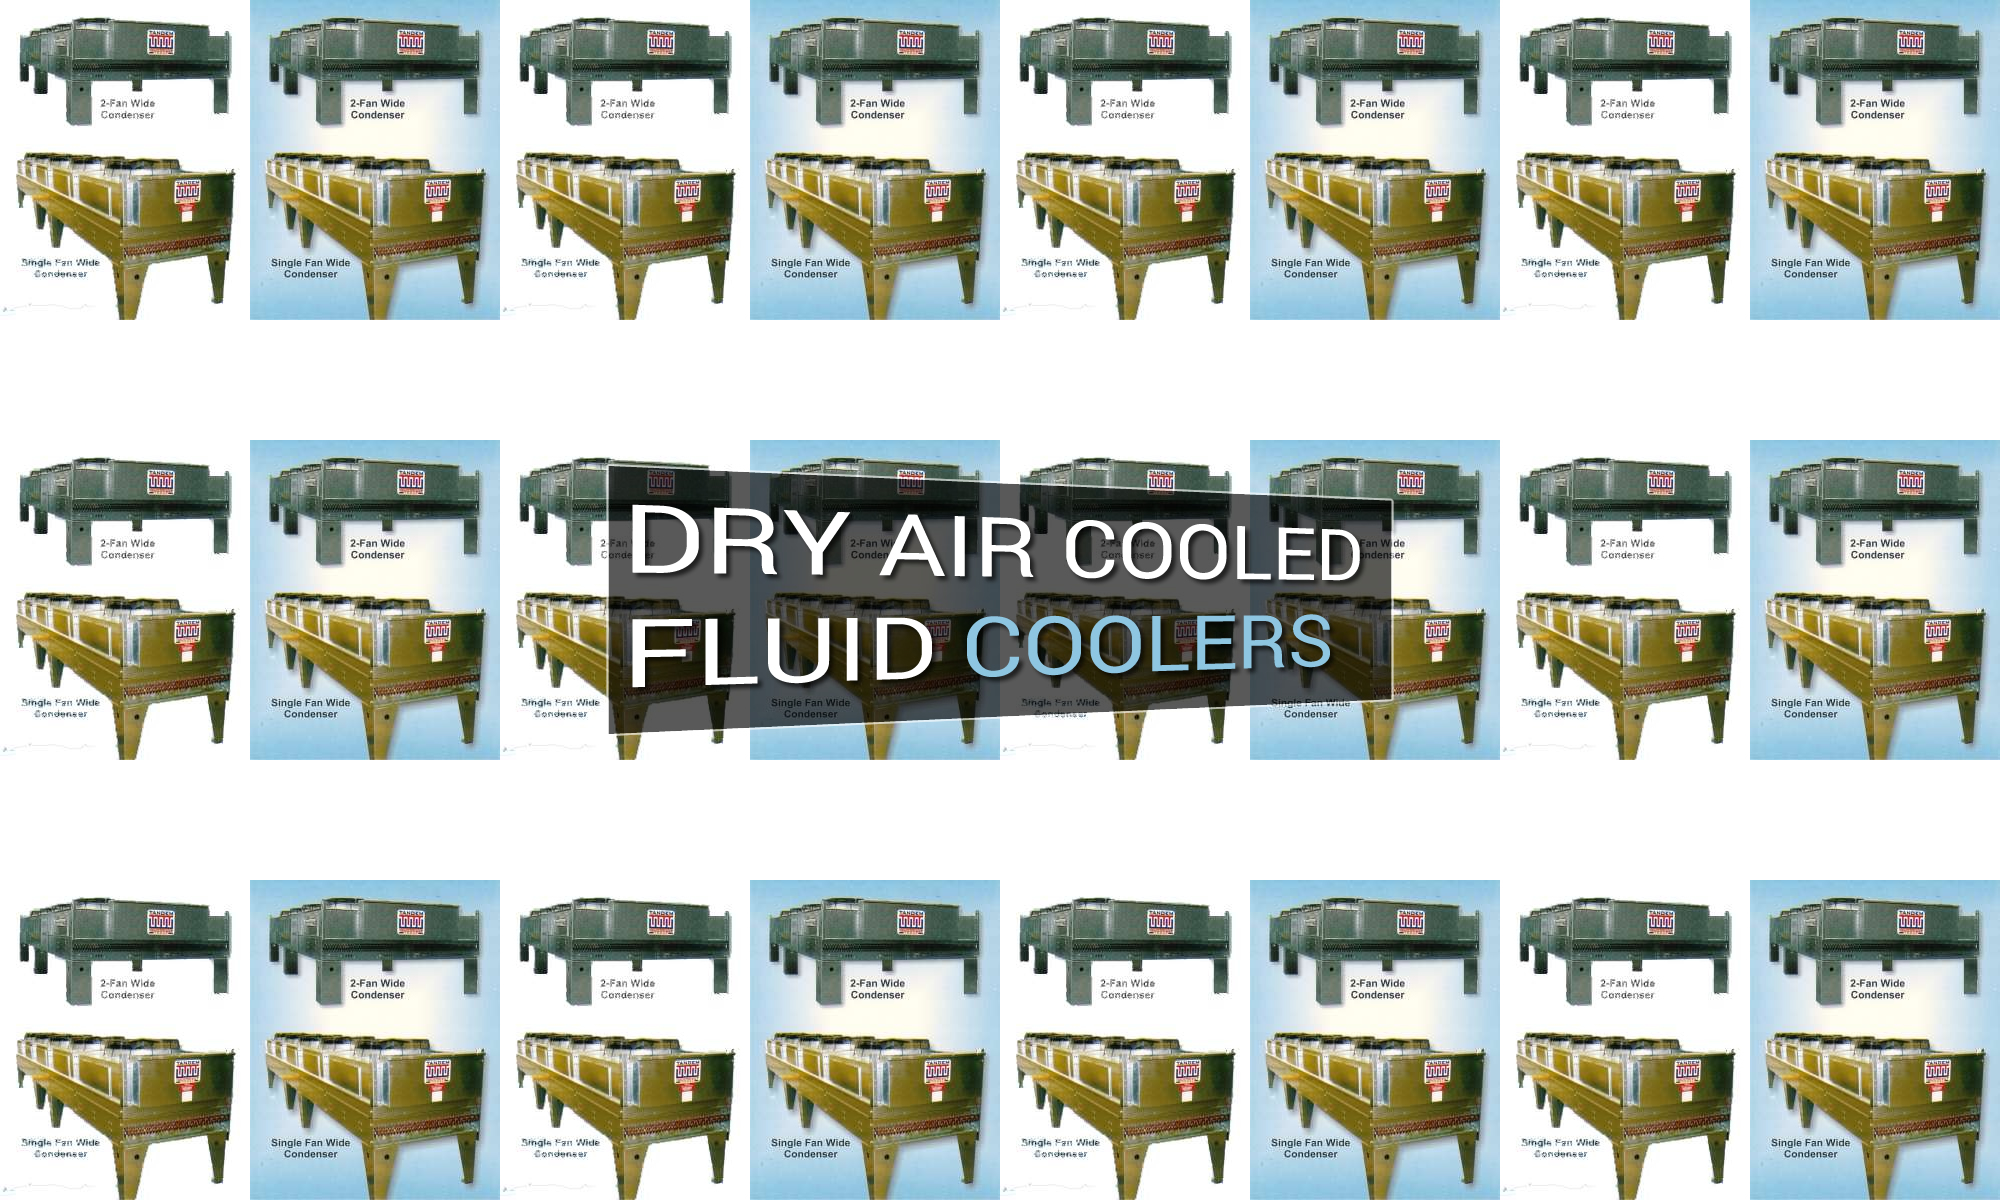 Dry Air Cooled Fluid Coolers